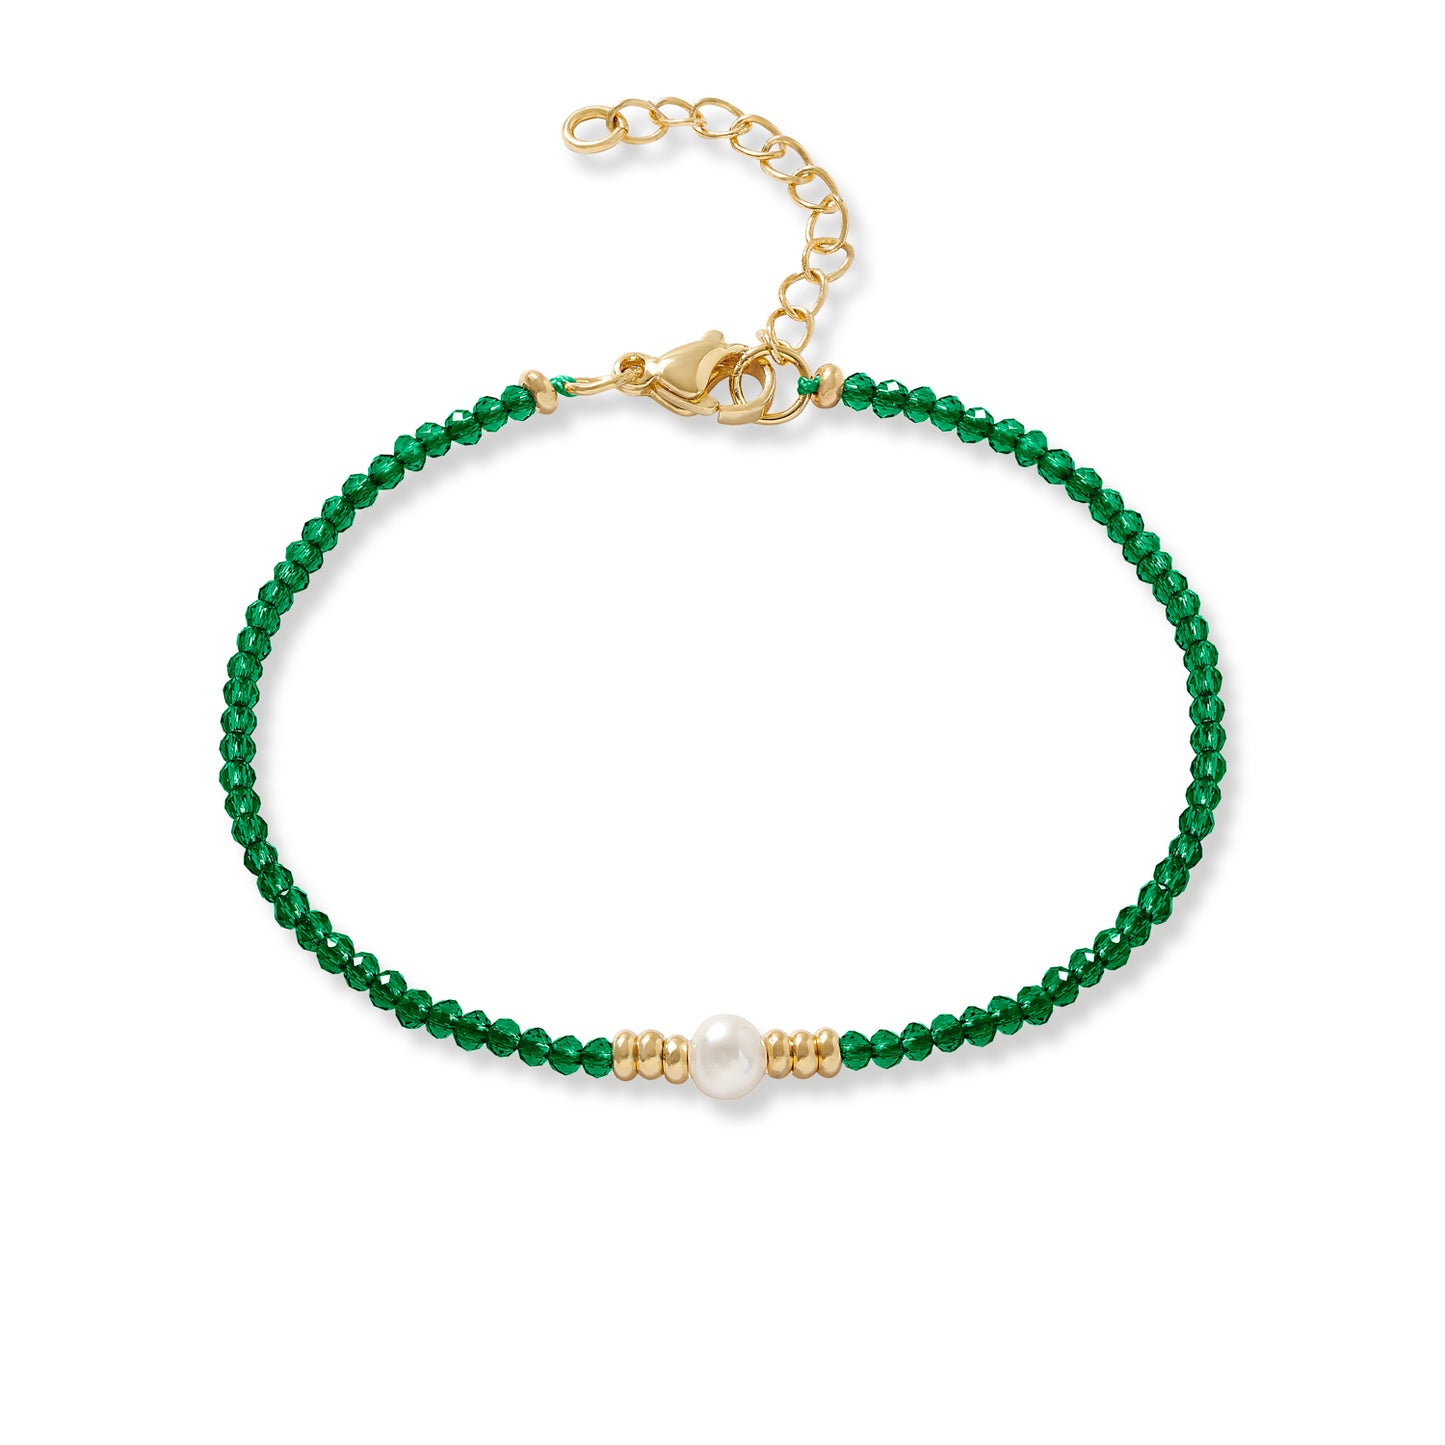 Clara fine green spinel bracelet with central cultured freshwater pearl